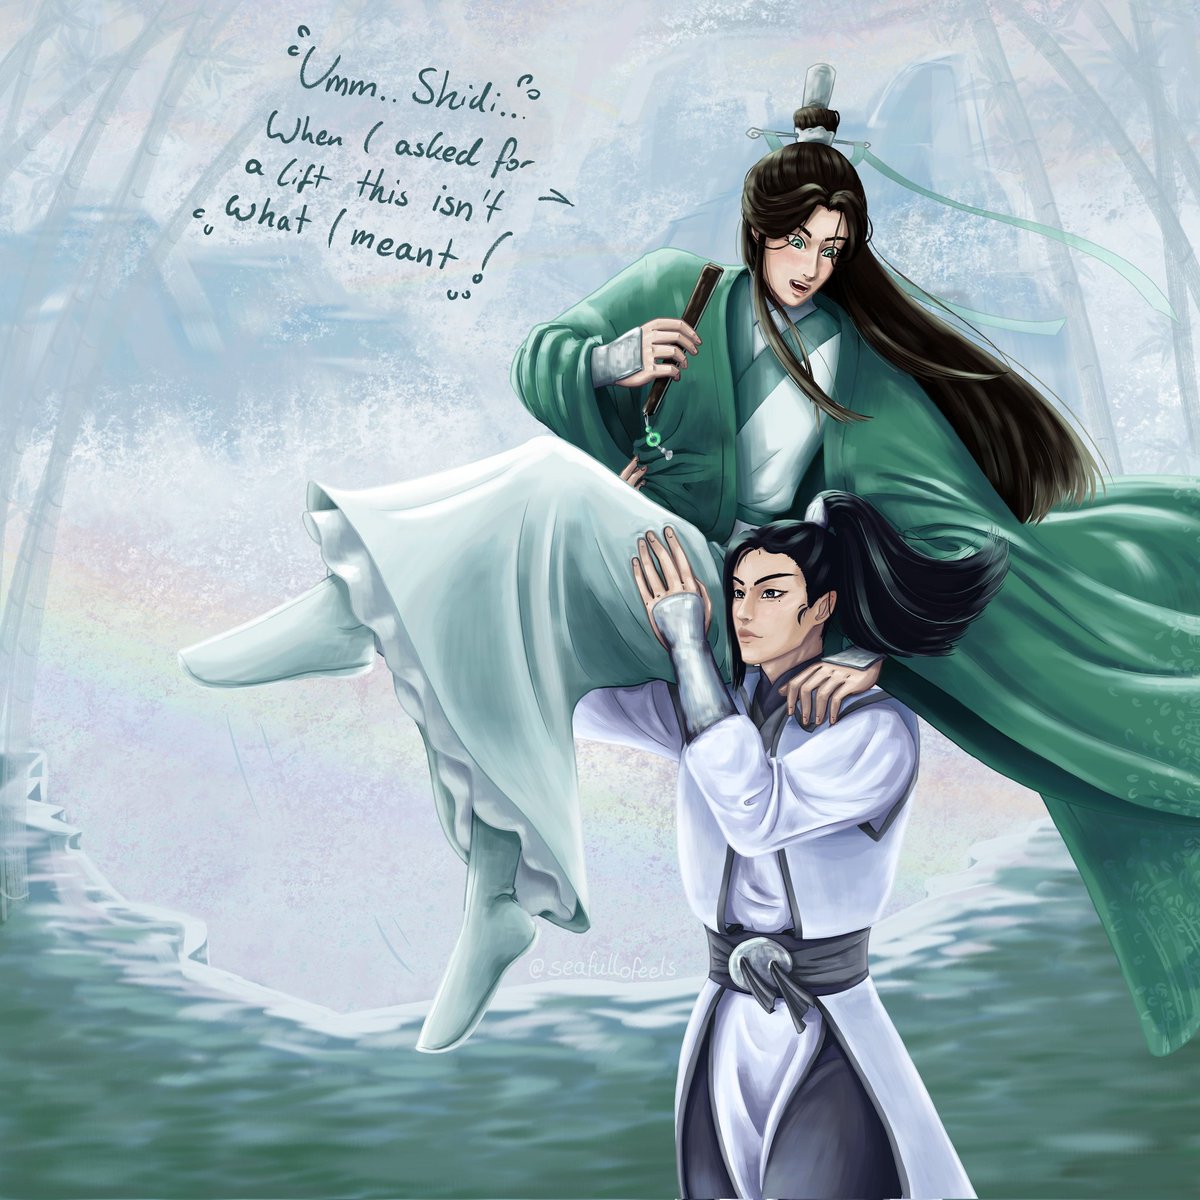 My entry for @rynanovel 's 1kDTIYS on Instagram! <3 Please check her insta account out if you see this :D
#LiuShen #svsss #LiuQingge #ShenQingqiu